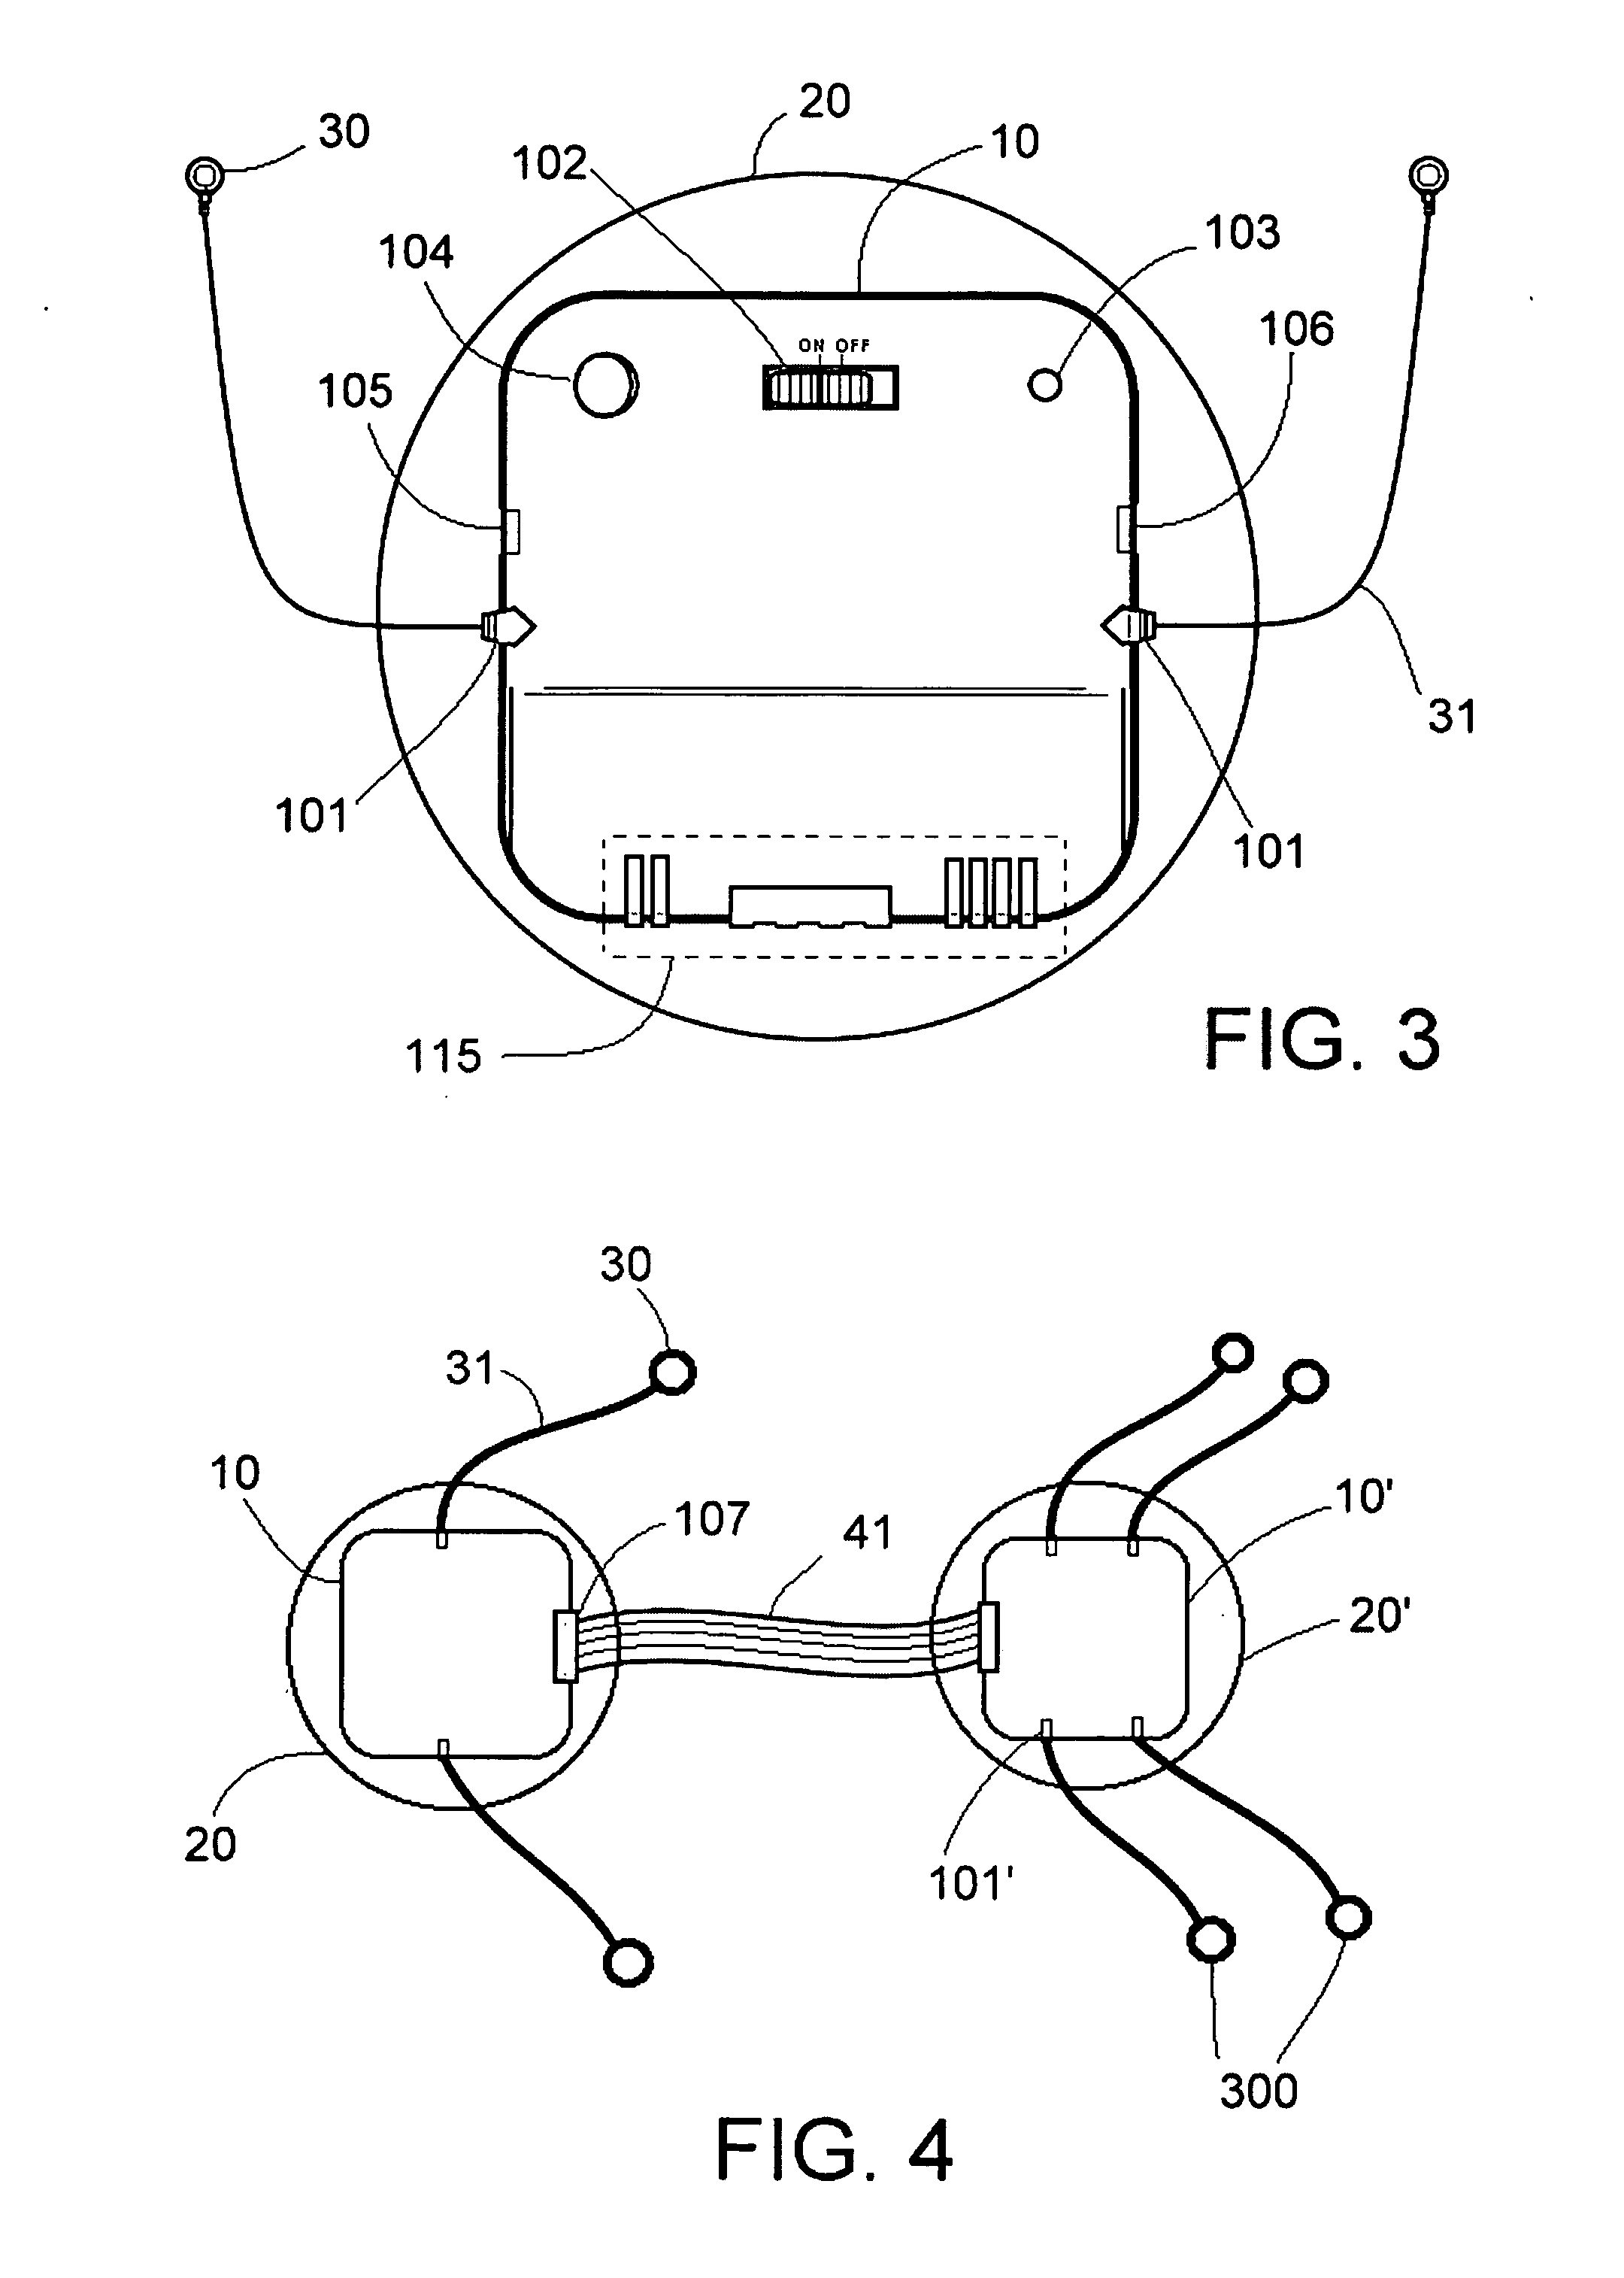 Patch-type physiological monitoring apparatus, system and network